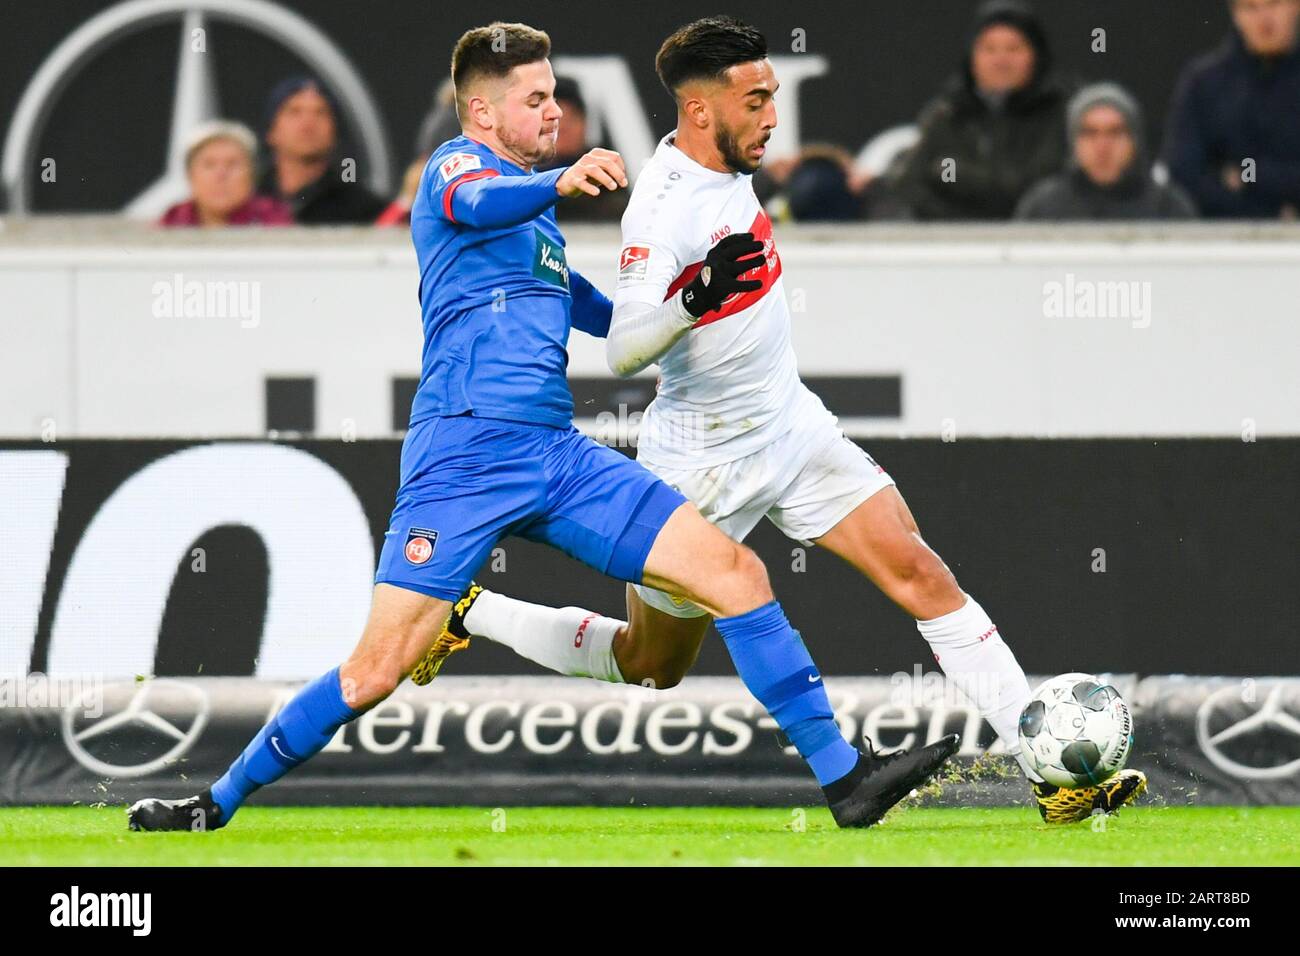 Stuttgart, Germany. 29th Jan, 2020. Football: 2nd Bundesliga, 19th matchday, VfB Stuttgart - 1st FC Heidenheim, Mercedes-Benz Arena. Marnon Busch (l) from 1 FC Heidenheim in action against Nicolas Gonzalez (r) from VfB Stuttgart. Credit: Tom Weller/dpa - IMPORTANT NOTE: In accordance with the regulations of the DFL Deutsche Fußball Liga and the DFB Deutscher Fußball-Bund, it is prohibited to exploit or have exploited in the stadium and/or from the game taken photographs in the form of sequence images and/or video-like photo series./dpa/Alamy Live News Stock Photo